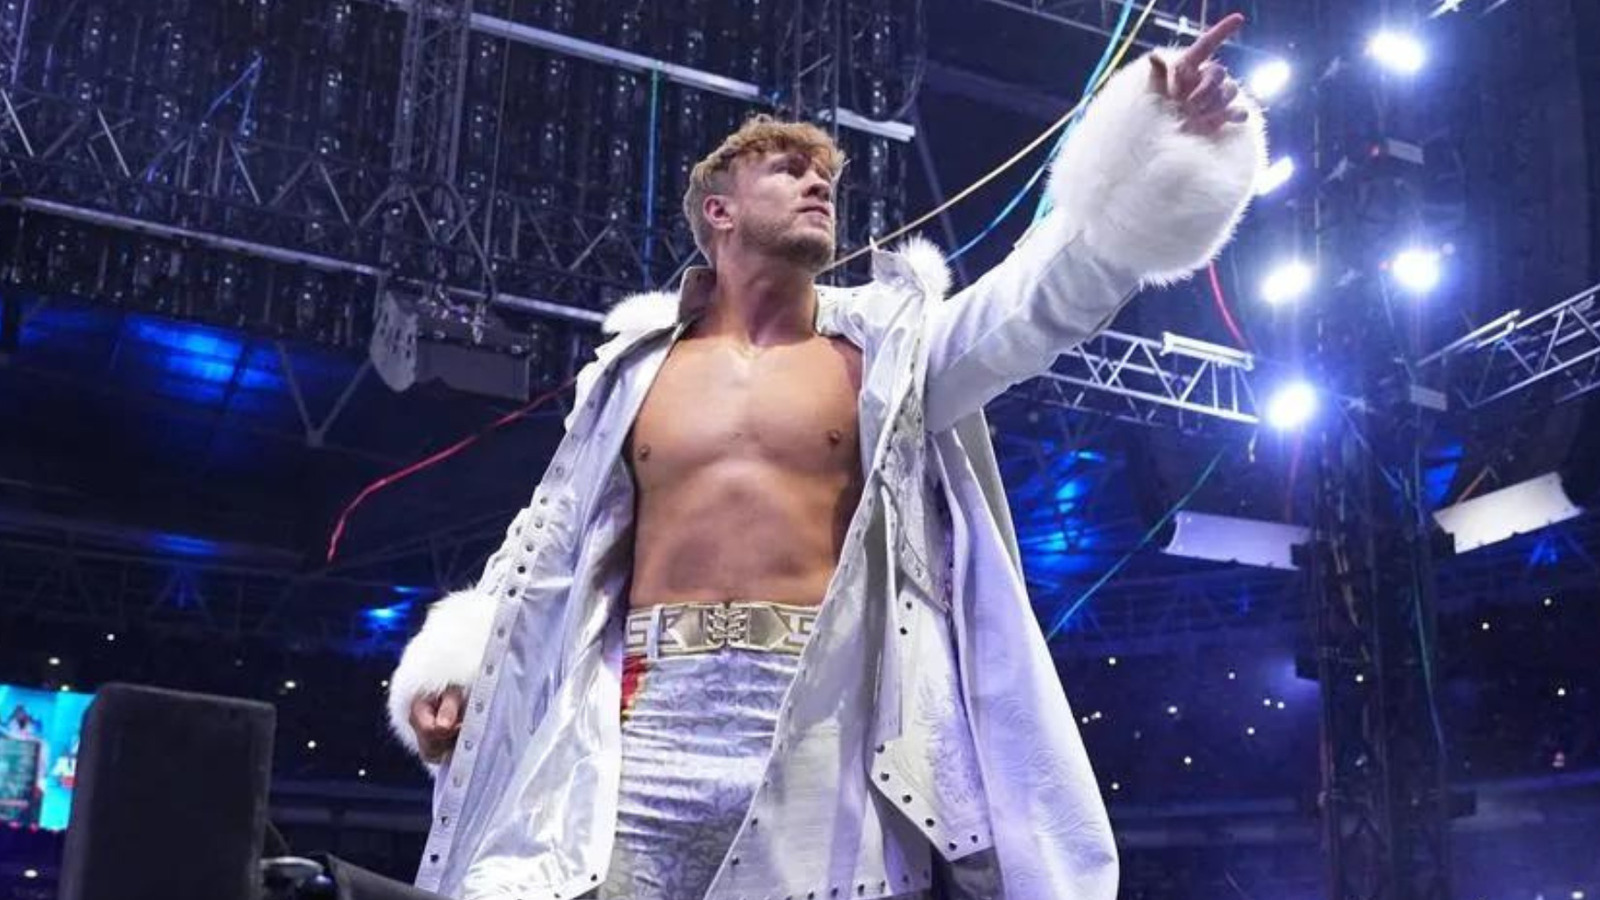 Will Ospreay Recalls Working AEW All In, Praises Tony Khan's B**** For
Running Wembley